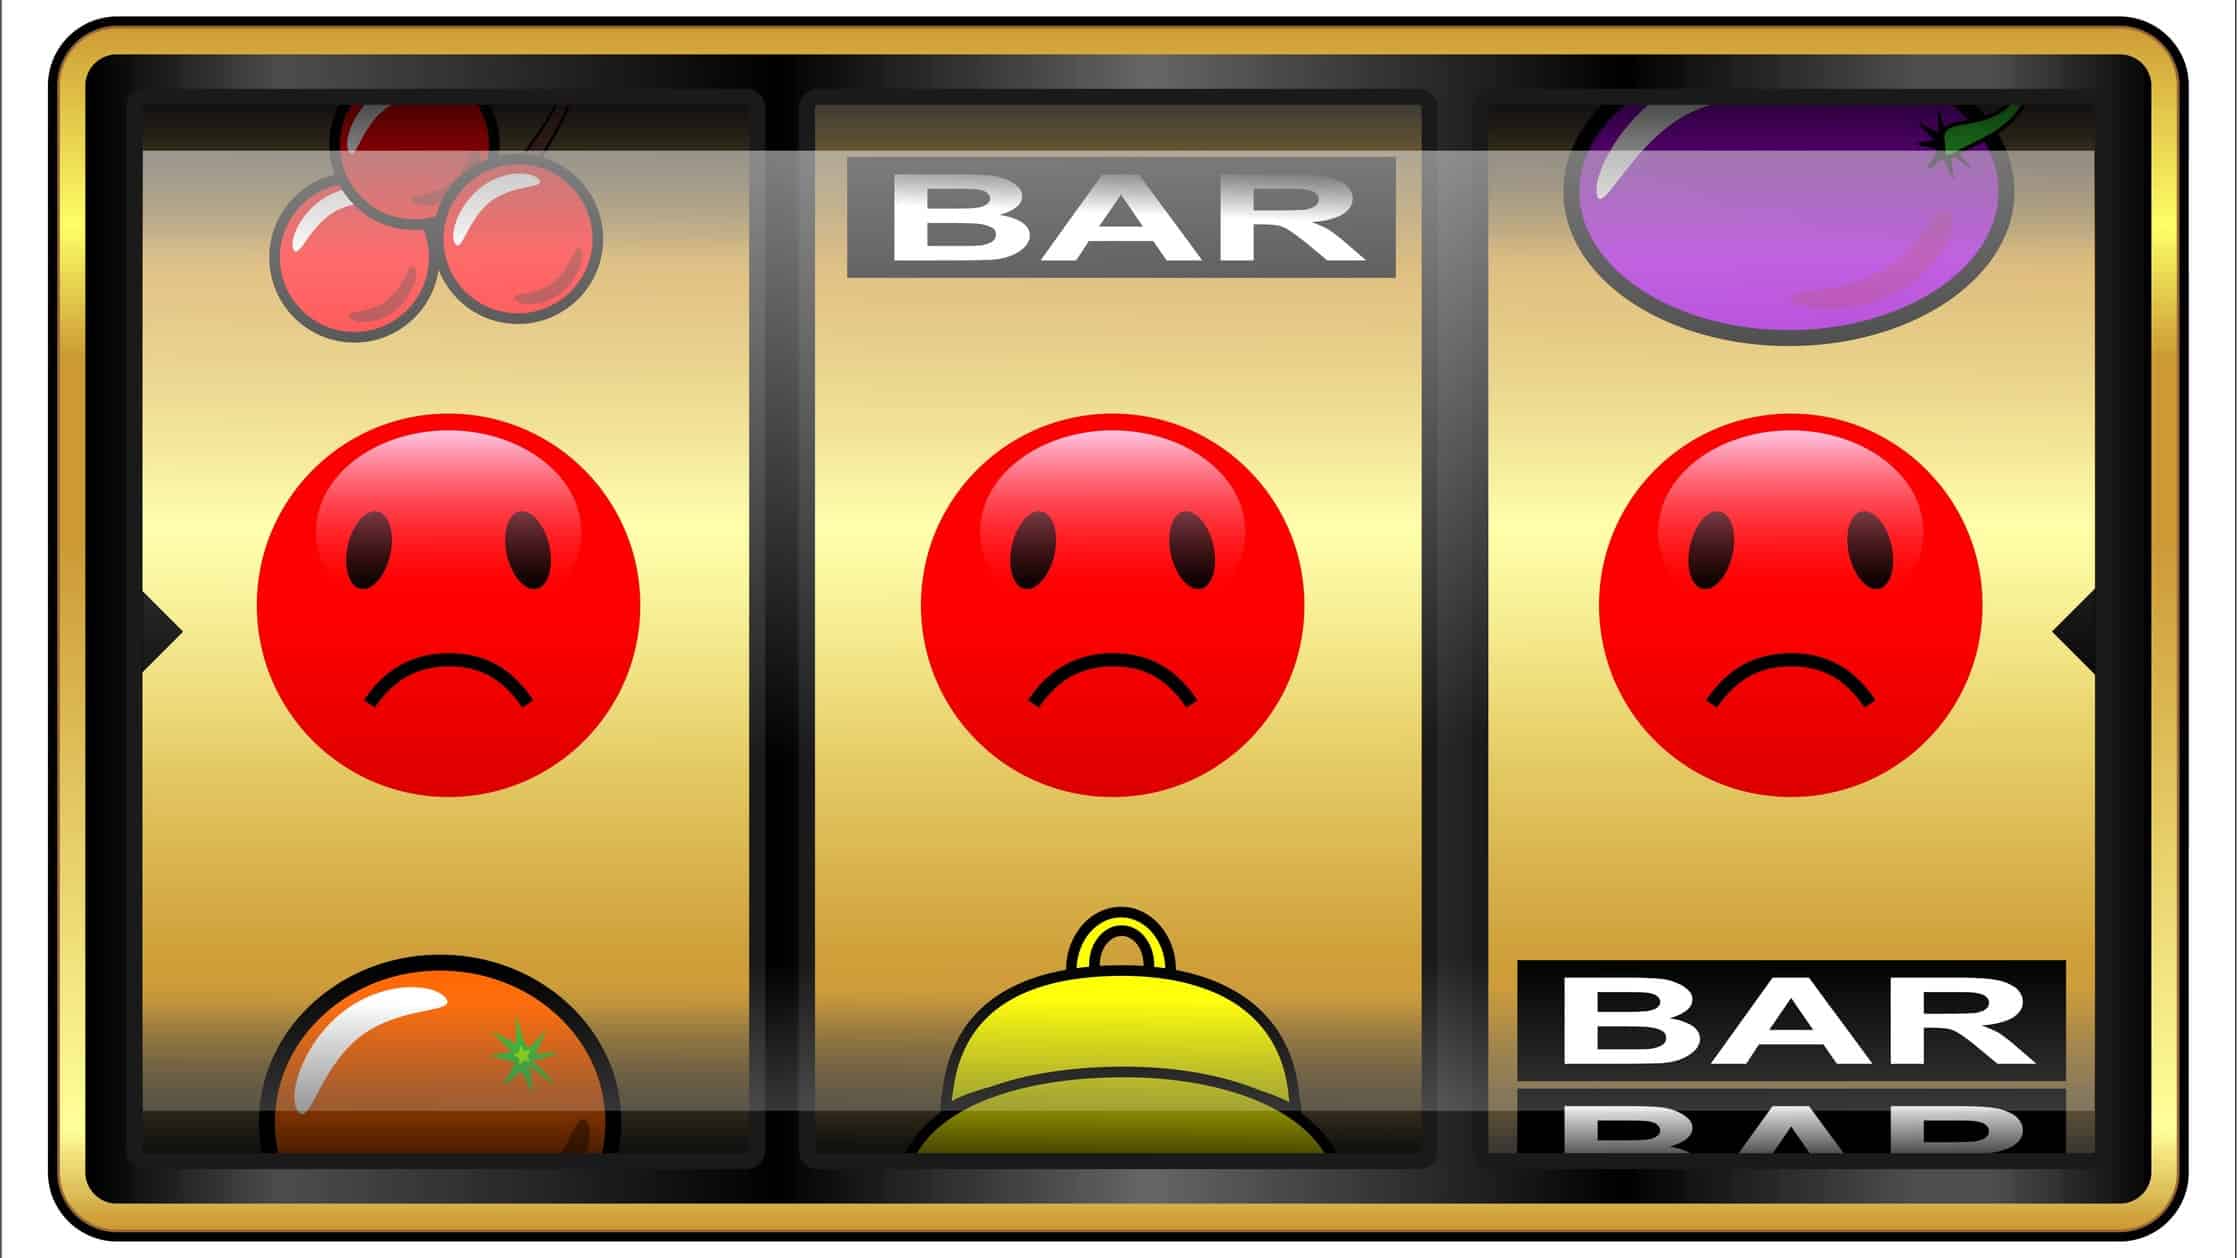 A slot machine with a row of red, sad faces, indicating a drop in the share price for gaming companies